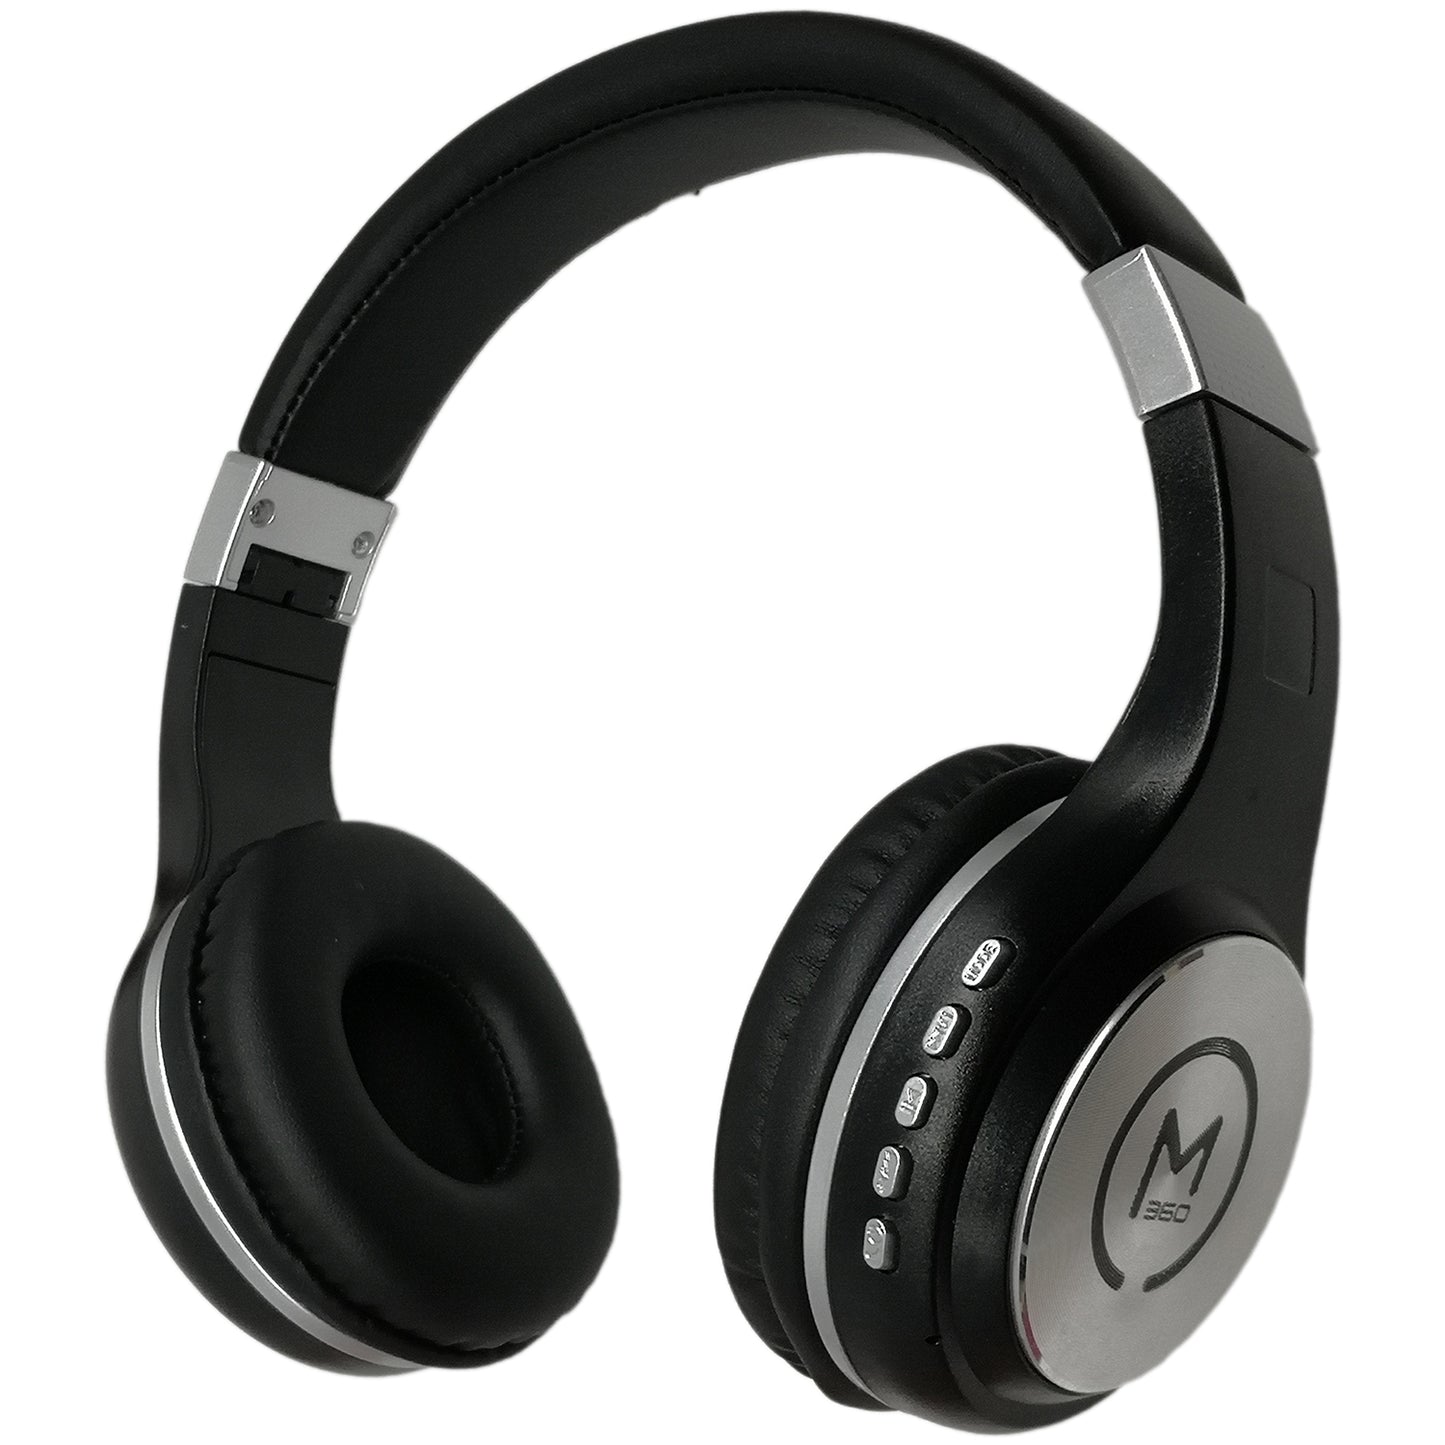 Photo of Morpheus 360 Serenity Wireless Over Ear Headphones showing the padded headband and plush comfortable earcups. Black with Silver accents.